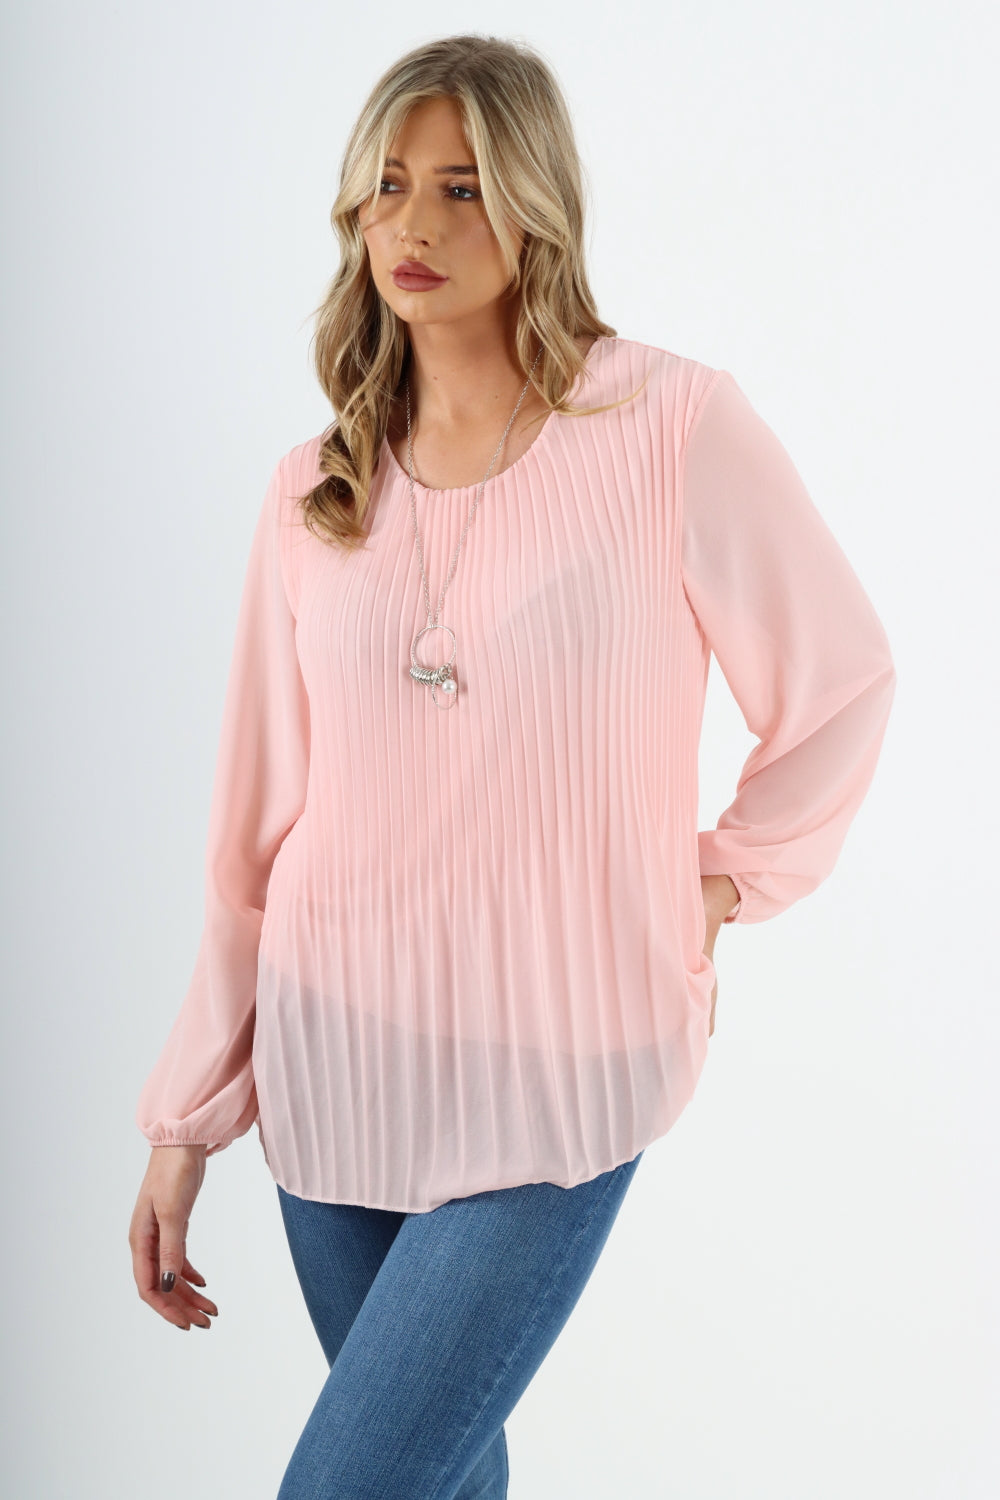 Plain Pleated Necklace Chiffon Top